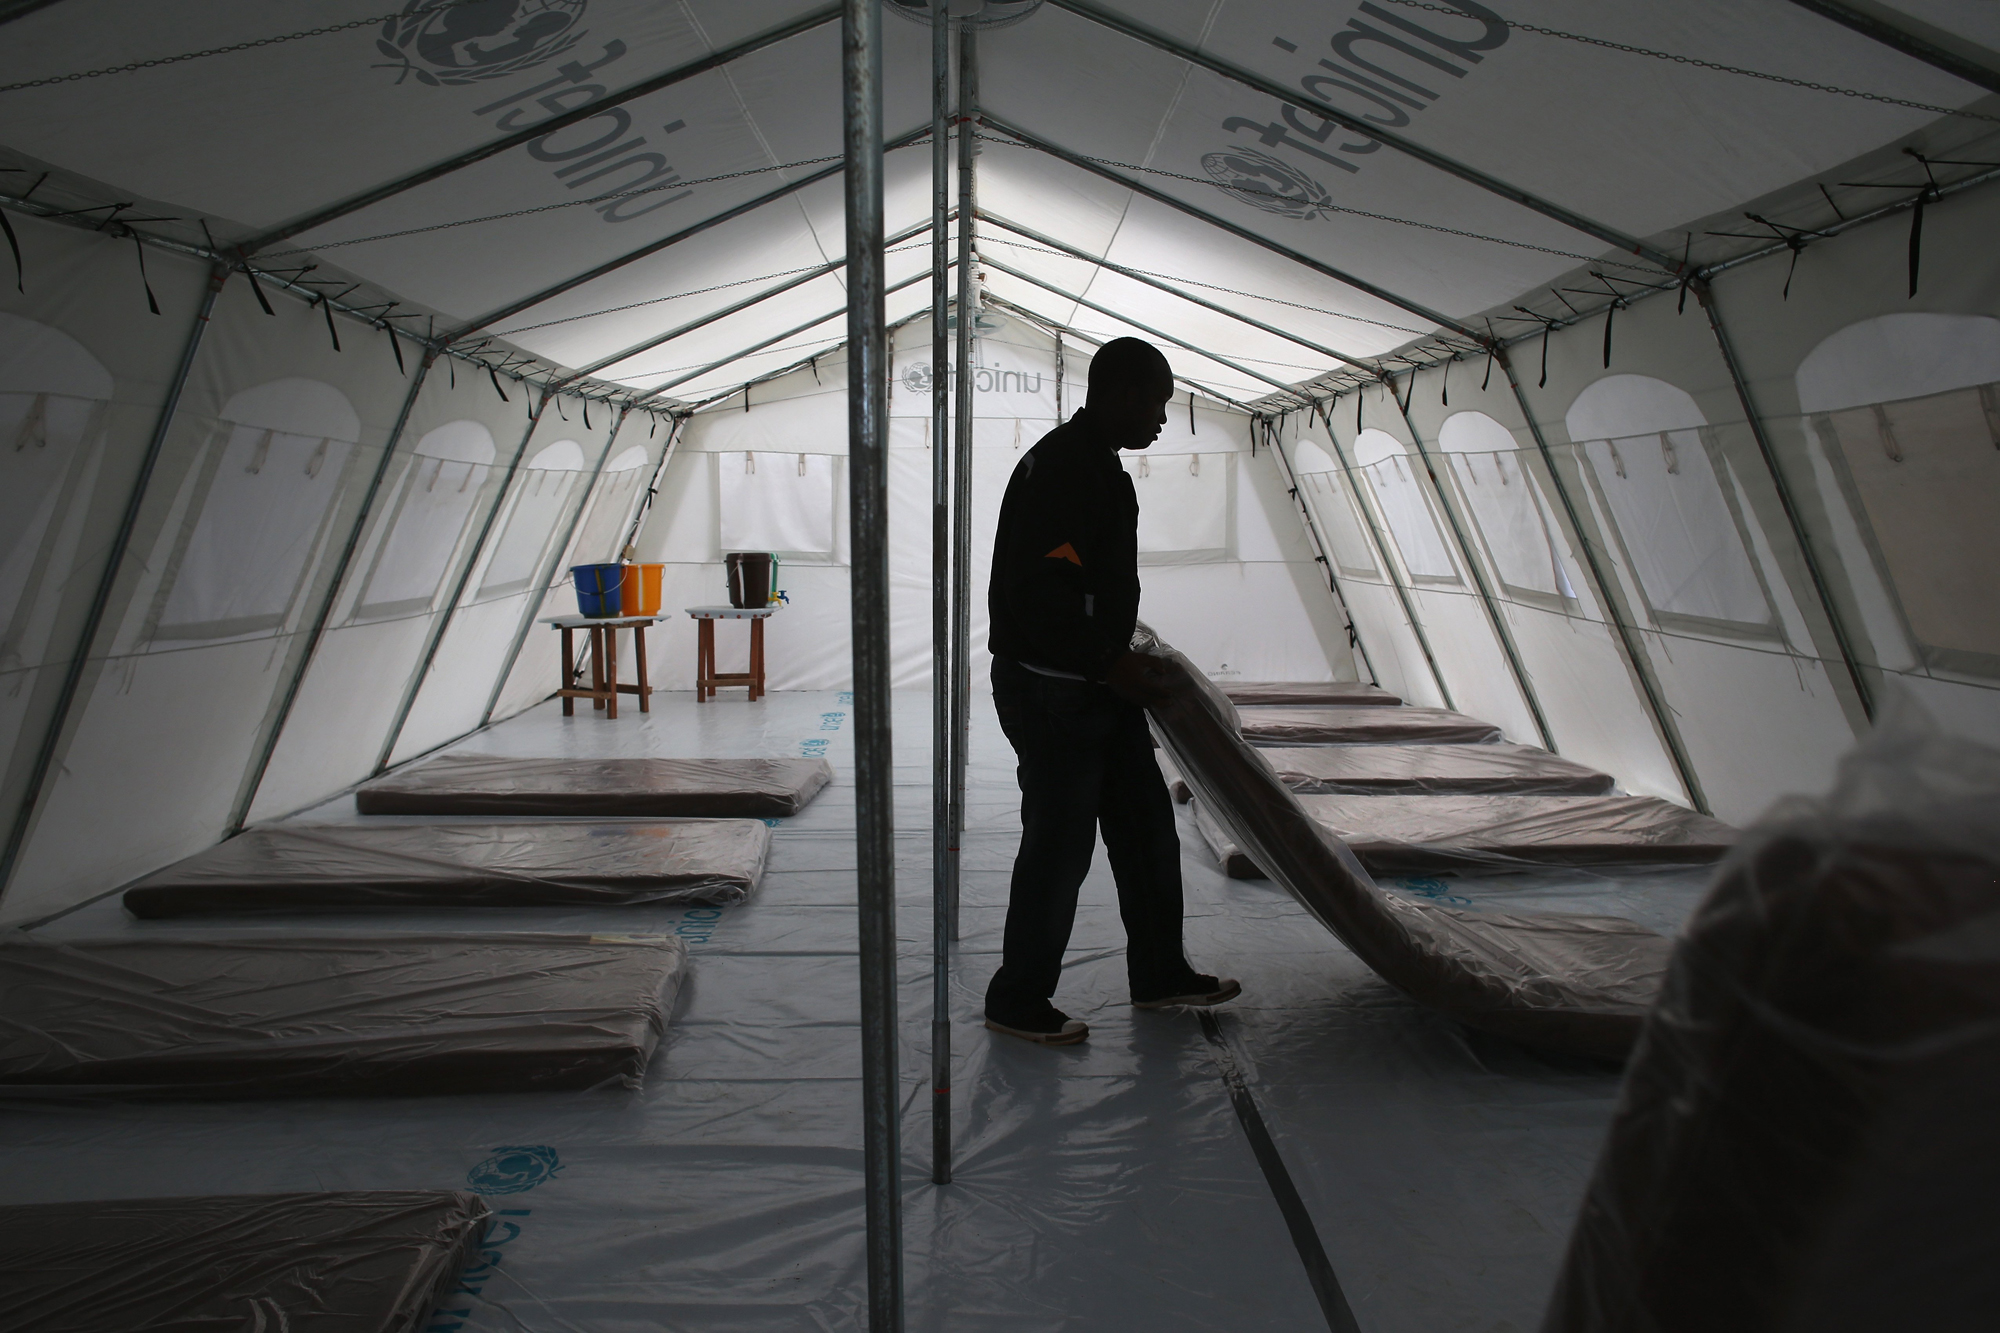 Workers prepare the new Doctors Without Borders, Ebola treatment center on Aug. 17, 2014 near Monrovia, Liberia. Tents at the center were provided by UNICEF. (John Moore—Getty Images)